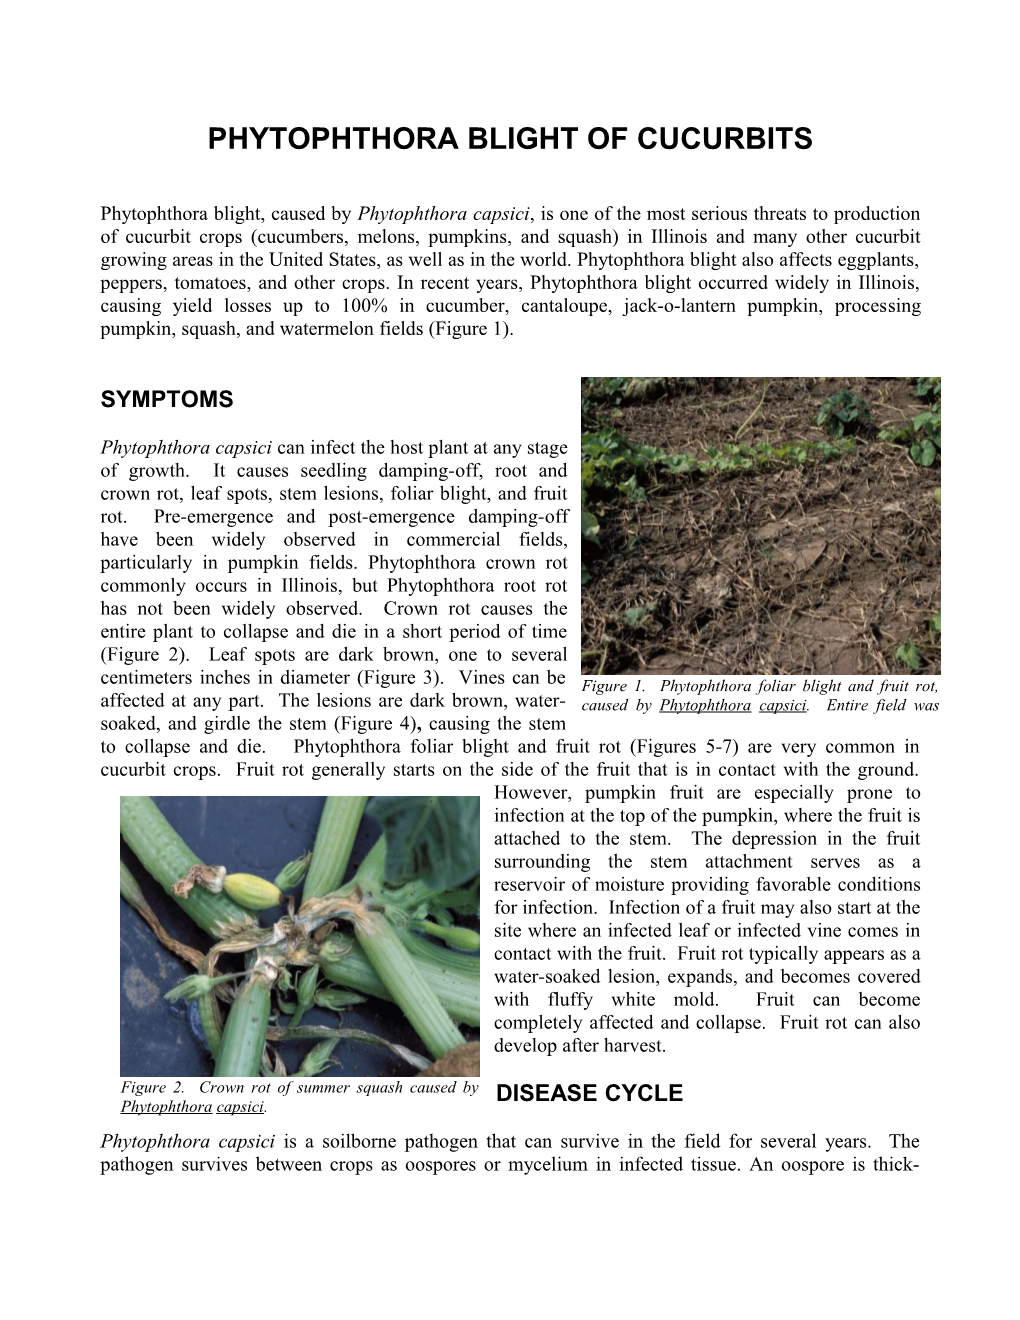 Phytophthora Blight of Cucurbits